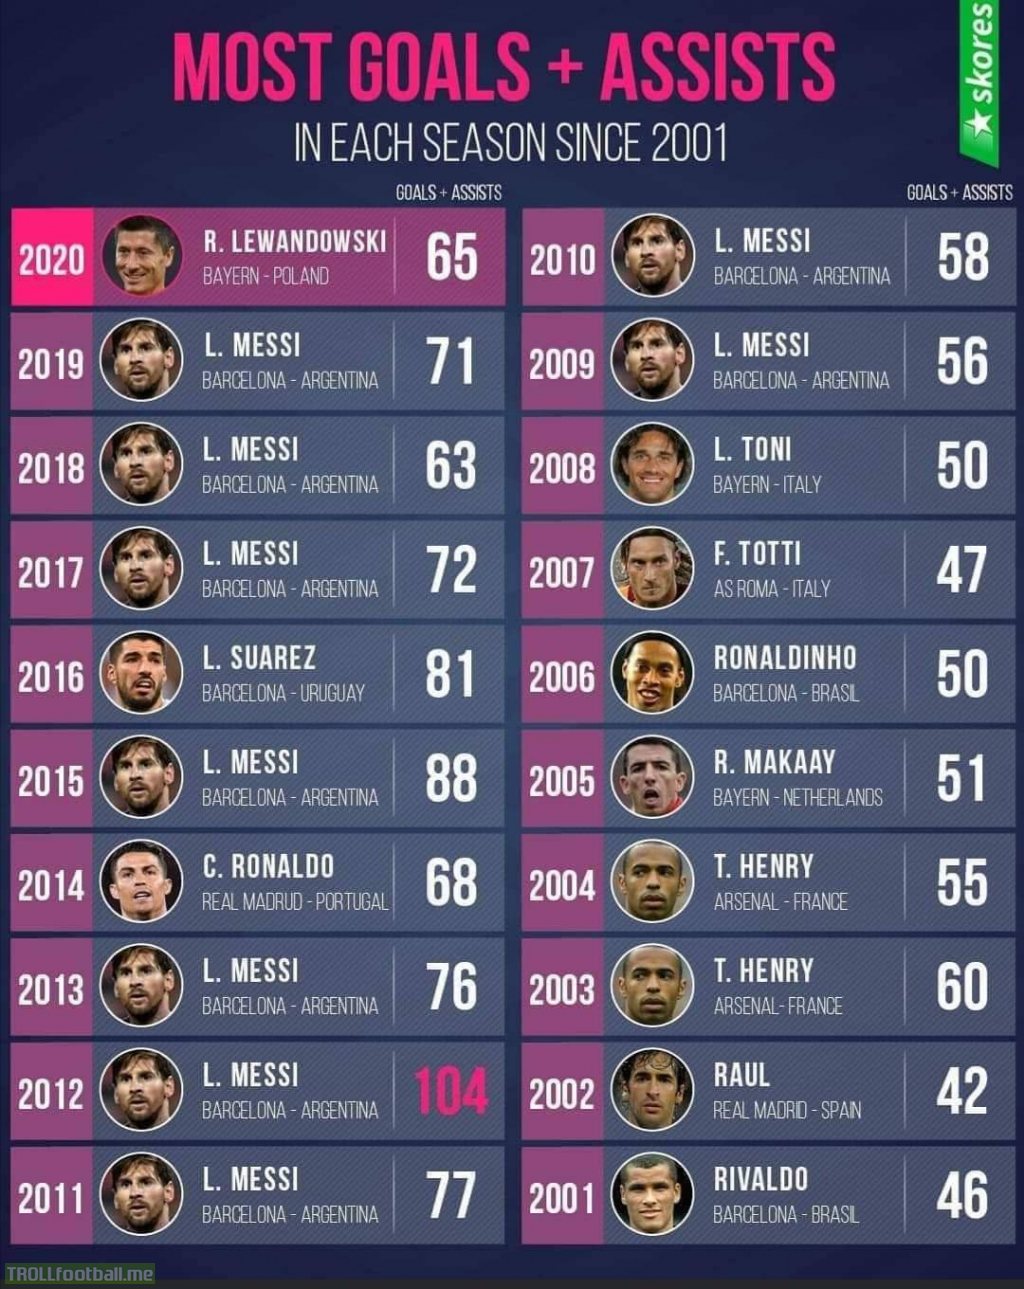 Players with the most goals+assists per season since 2001